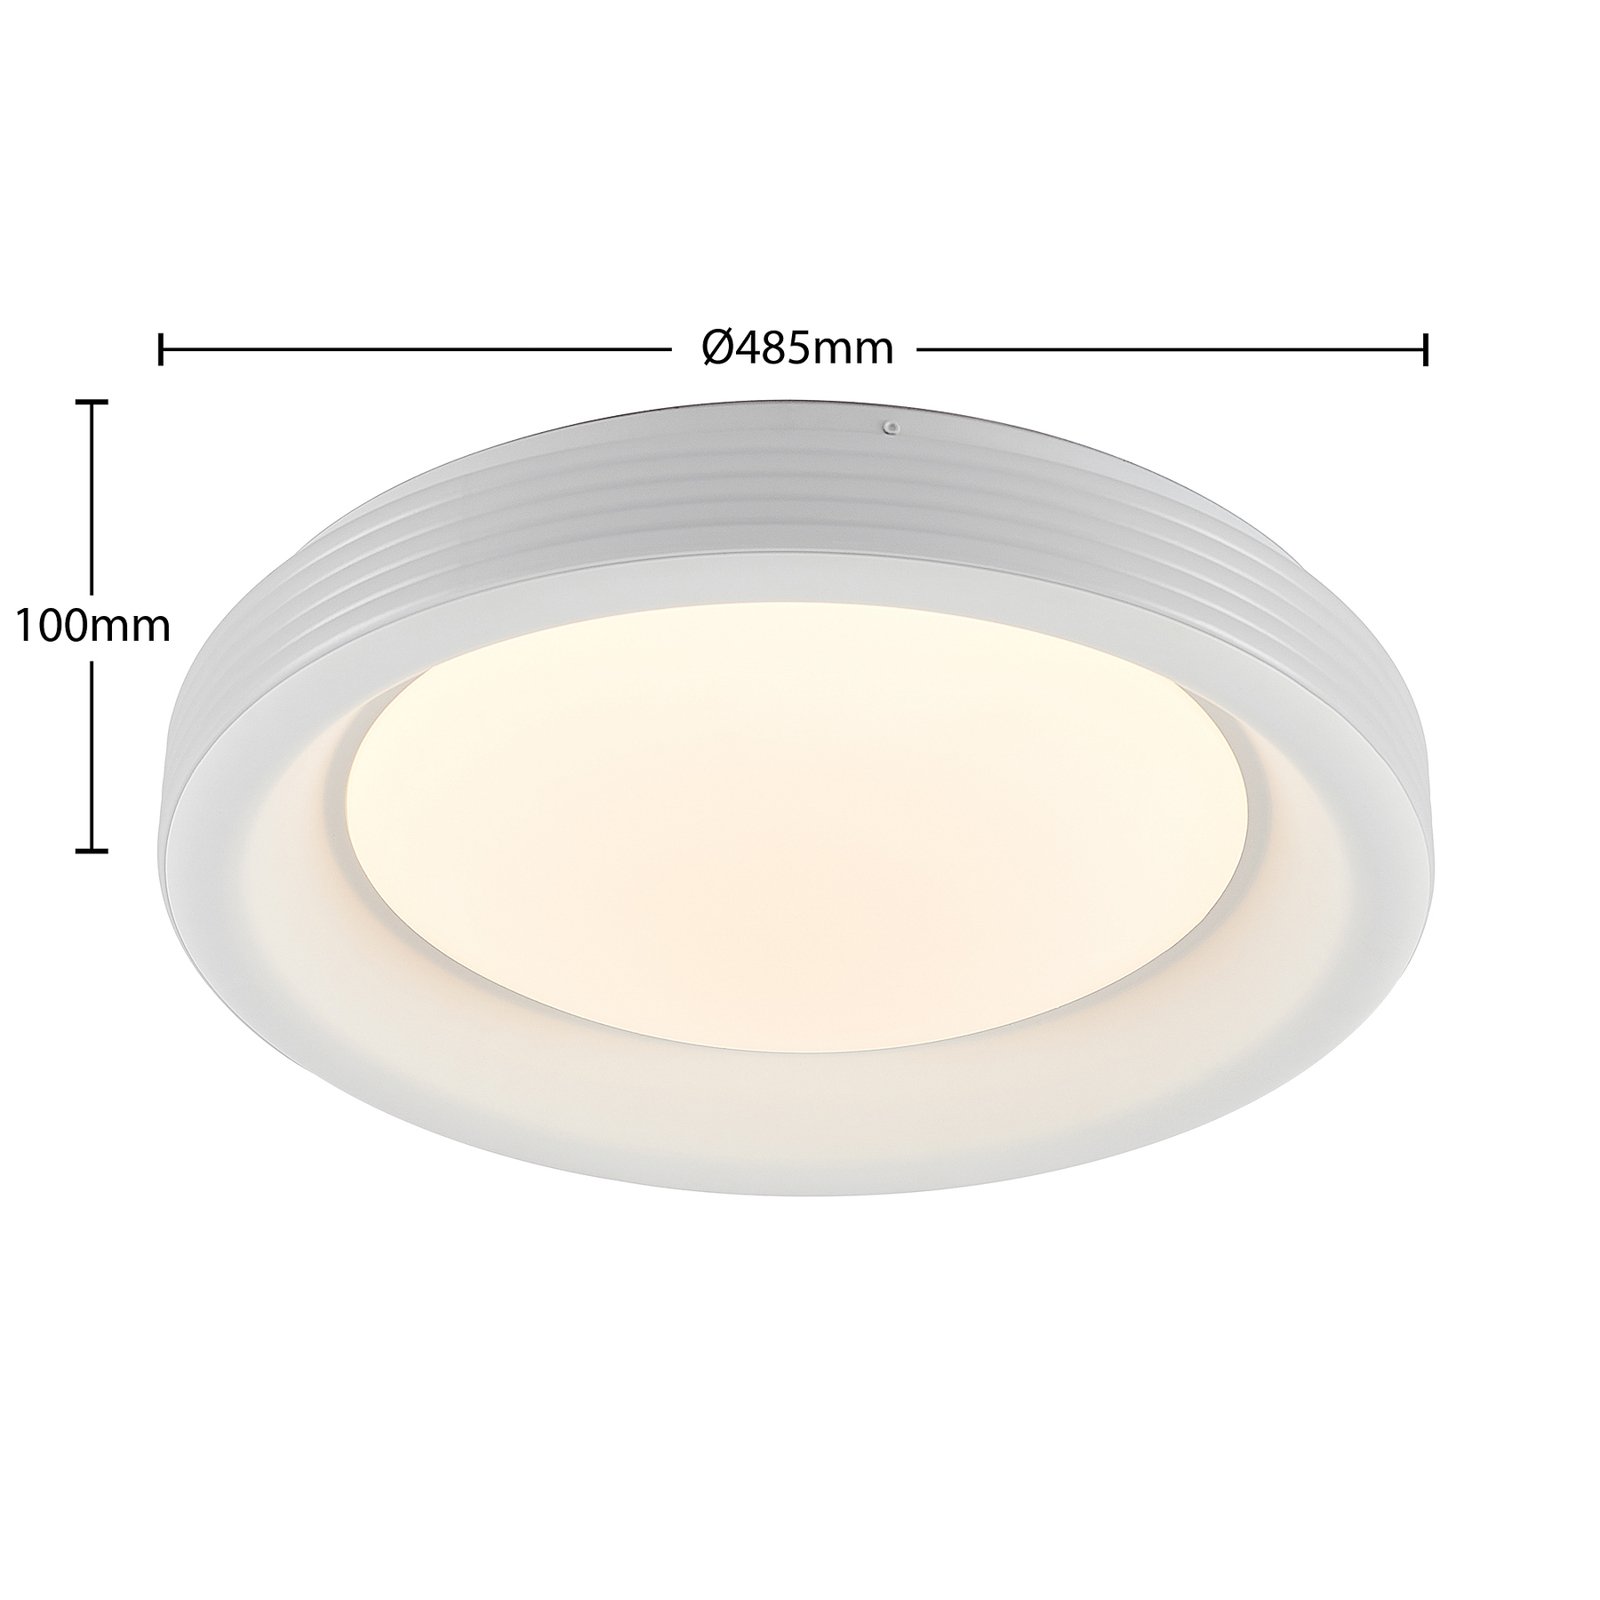 Lindby Inarum plafonnier LED, RVB, CCT, dimmable